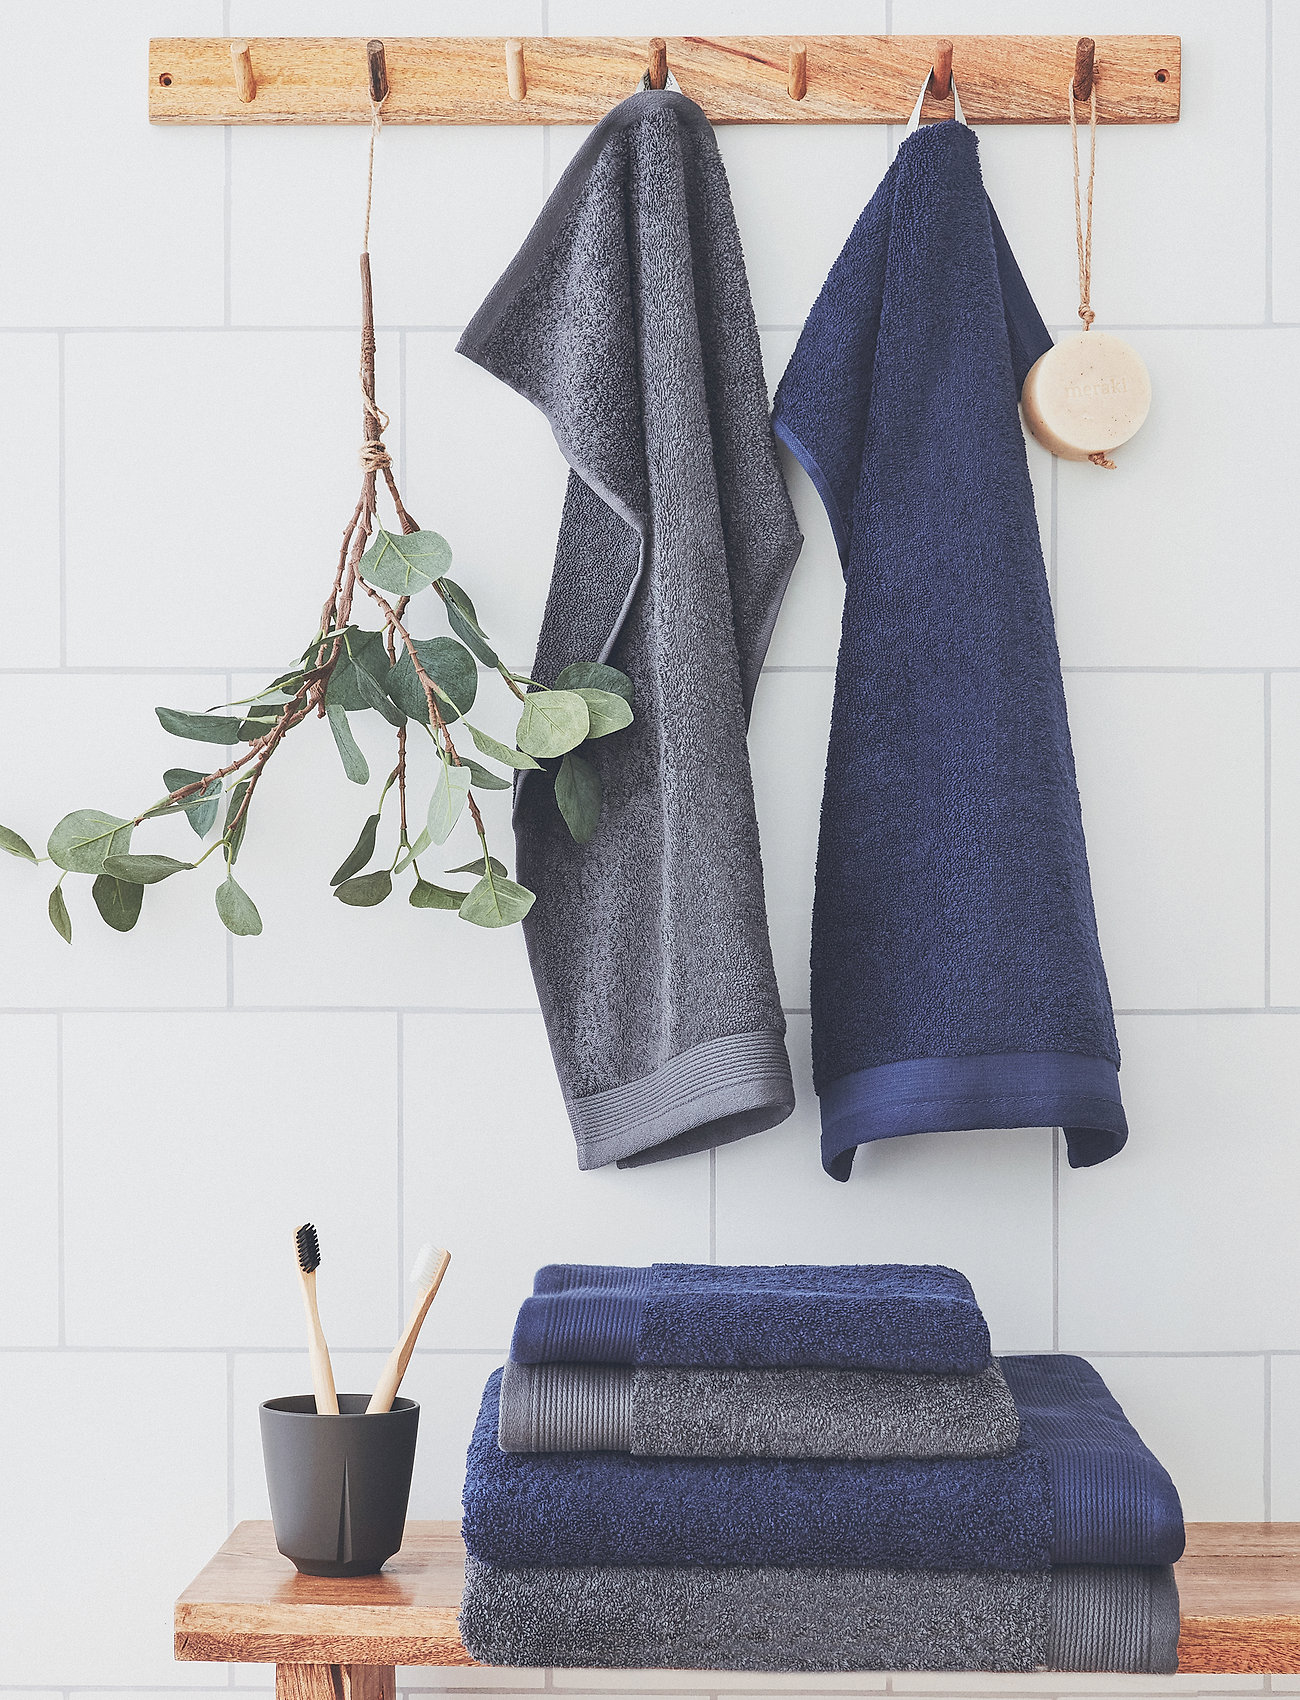 humble LIVING - humble LIVING Towel - lowest prices - navy - 1